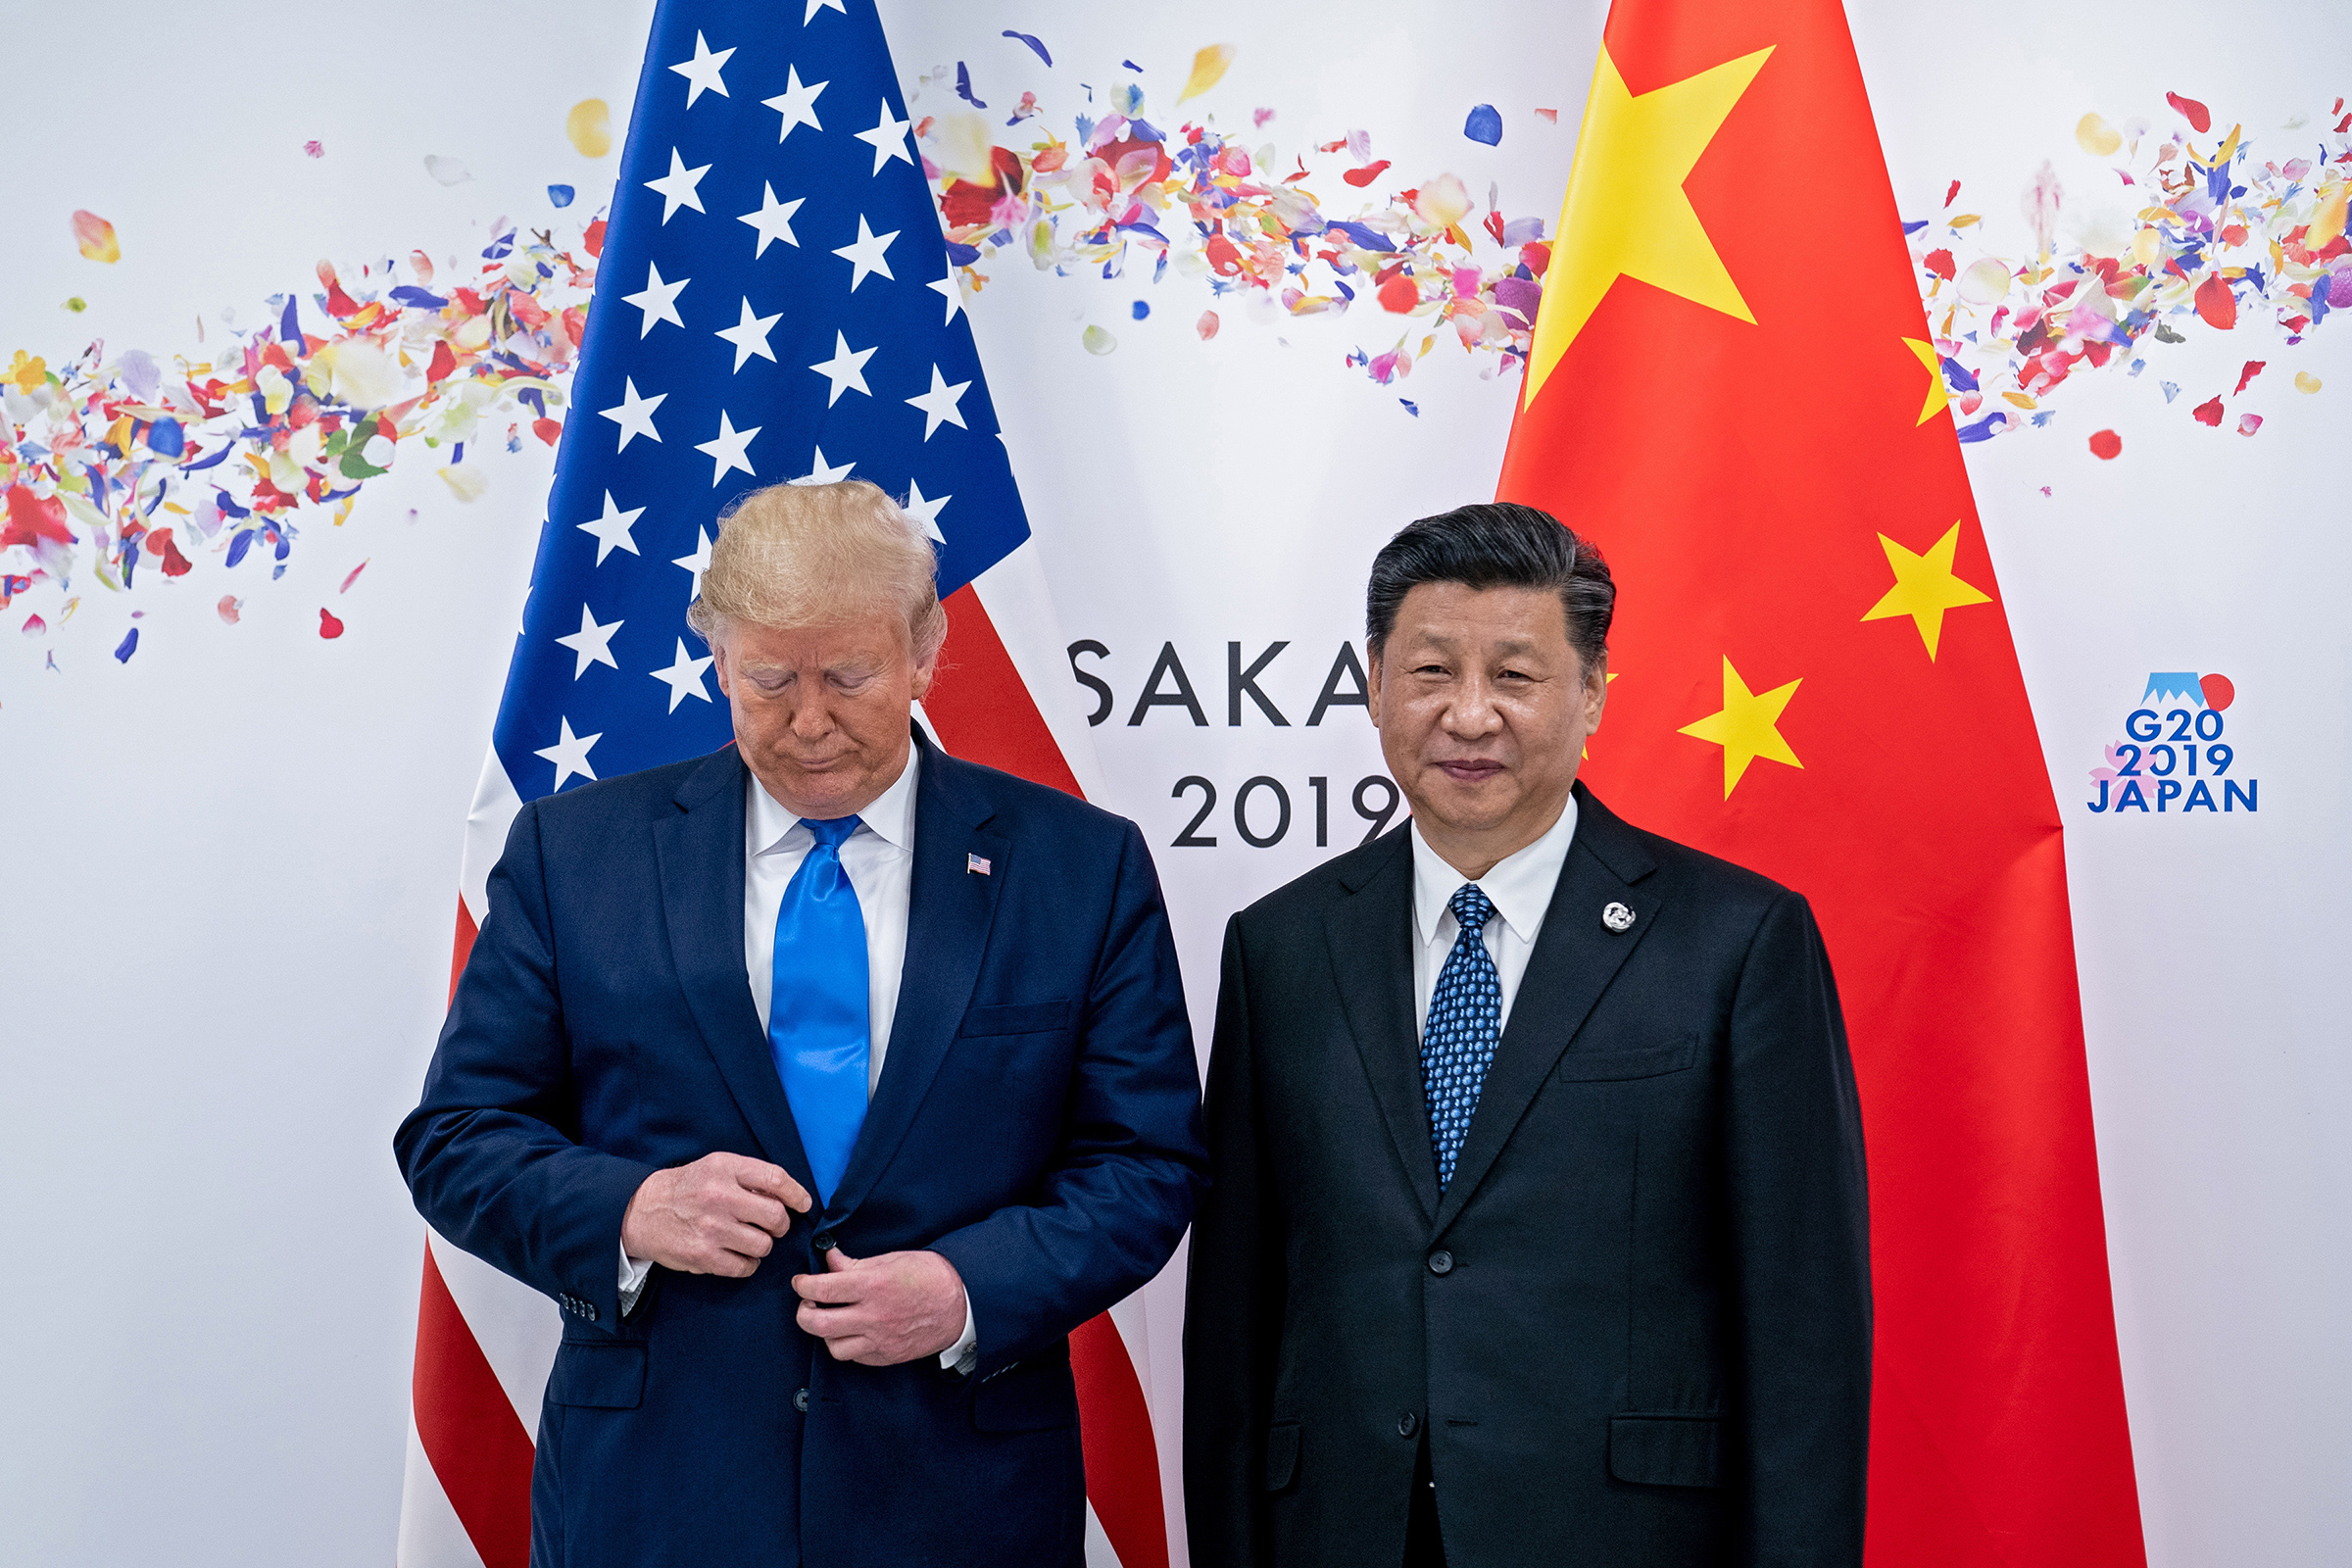 President Donald Trump and China's President Xi Jinping at the G20 Summit in Osaka, Japan, June 29, 2019 (Erin Schaff—The New York Times/Redux)